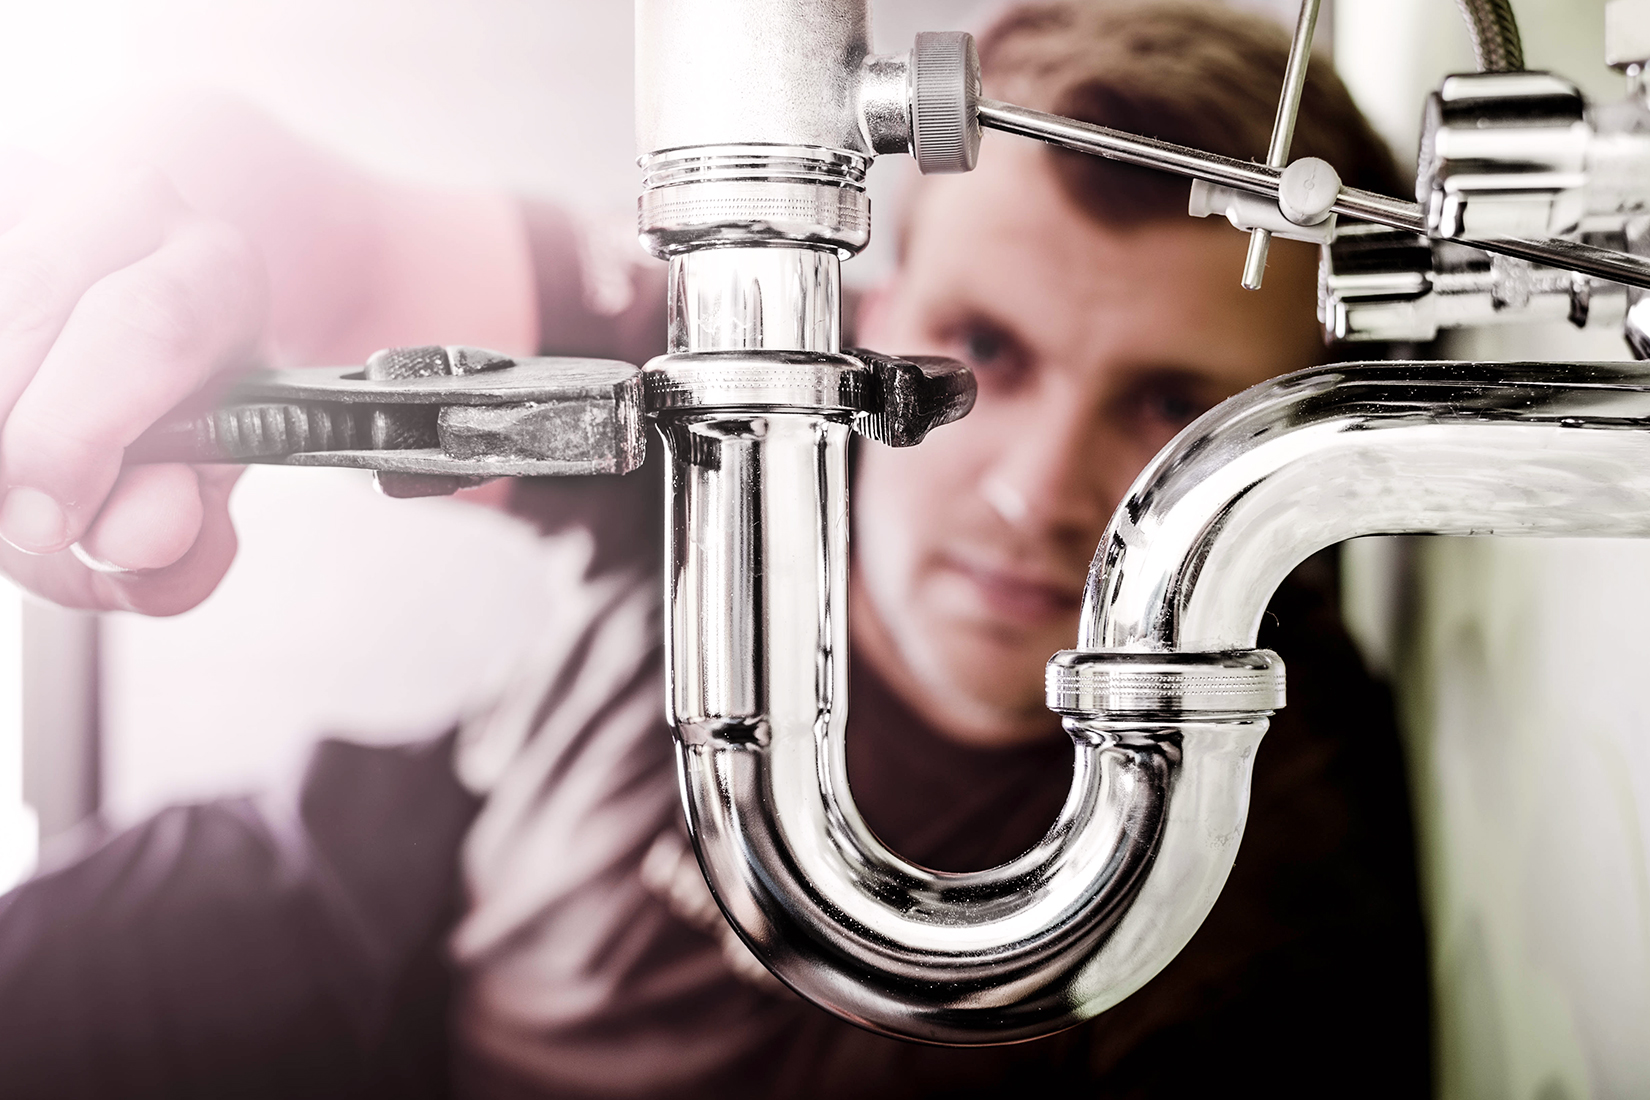 Why do different sectors of plumbing need services?